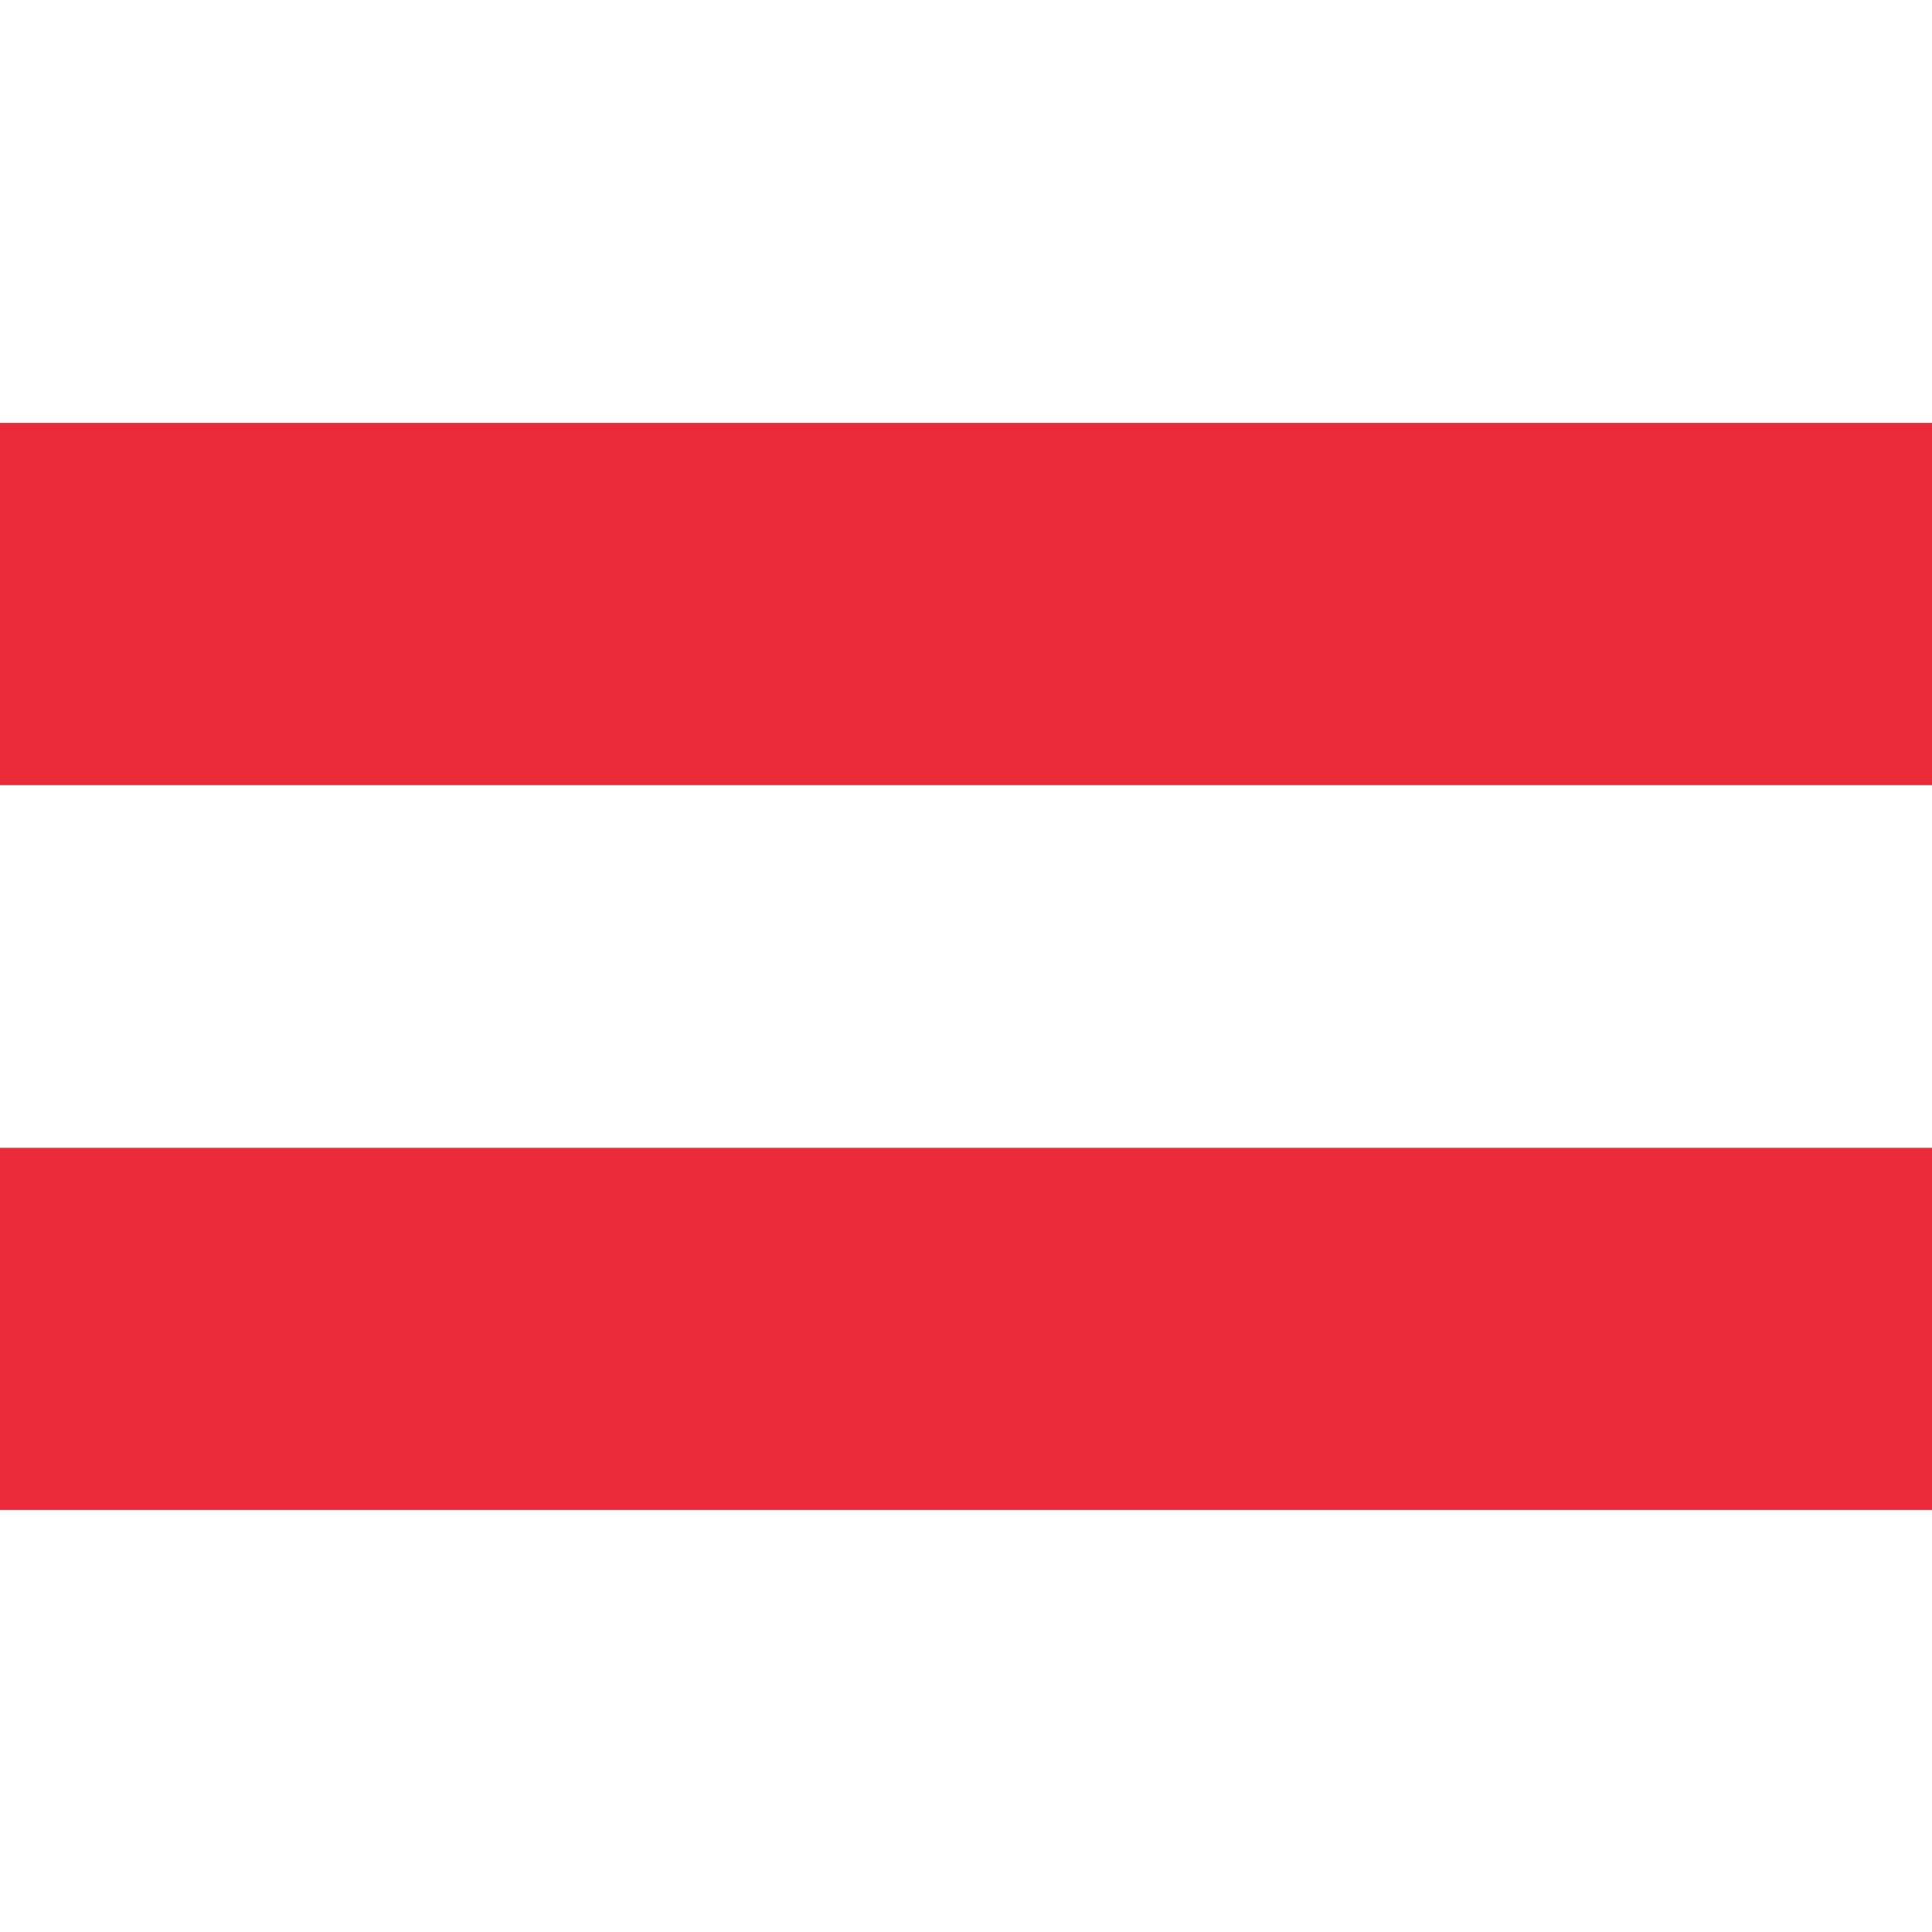 The Austrian flag consists of horizontal bands in red, white and red.